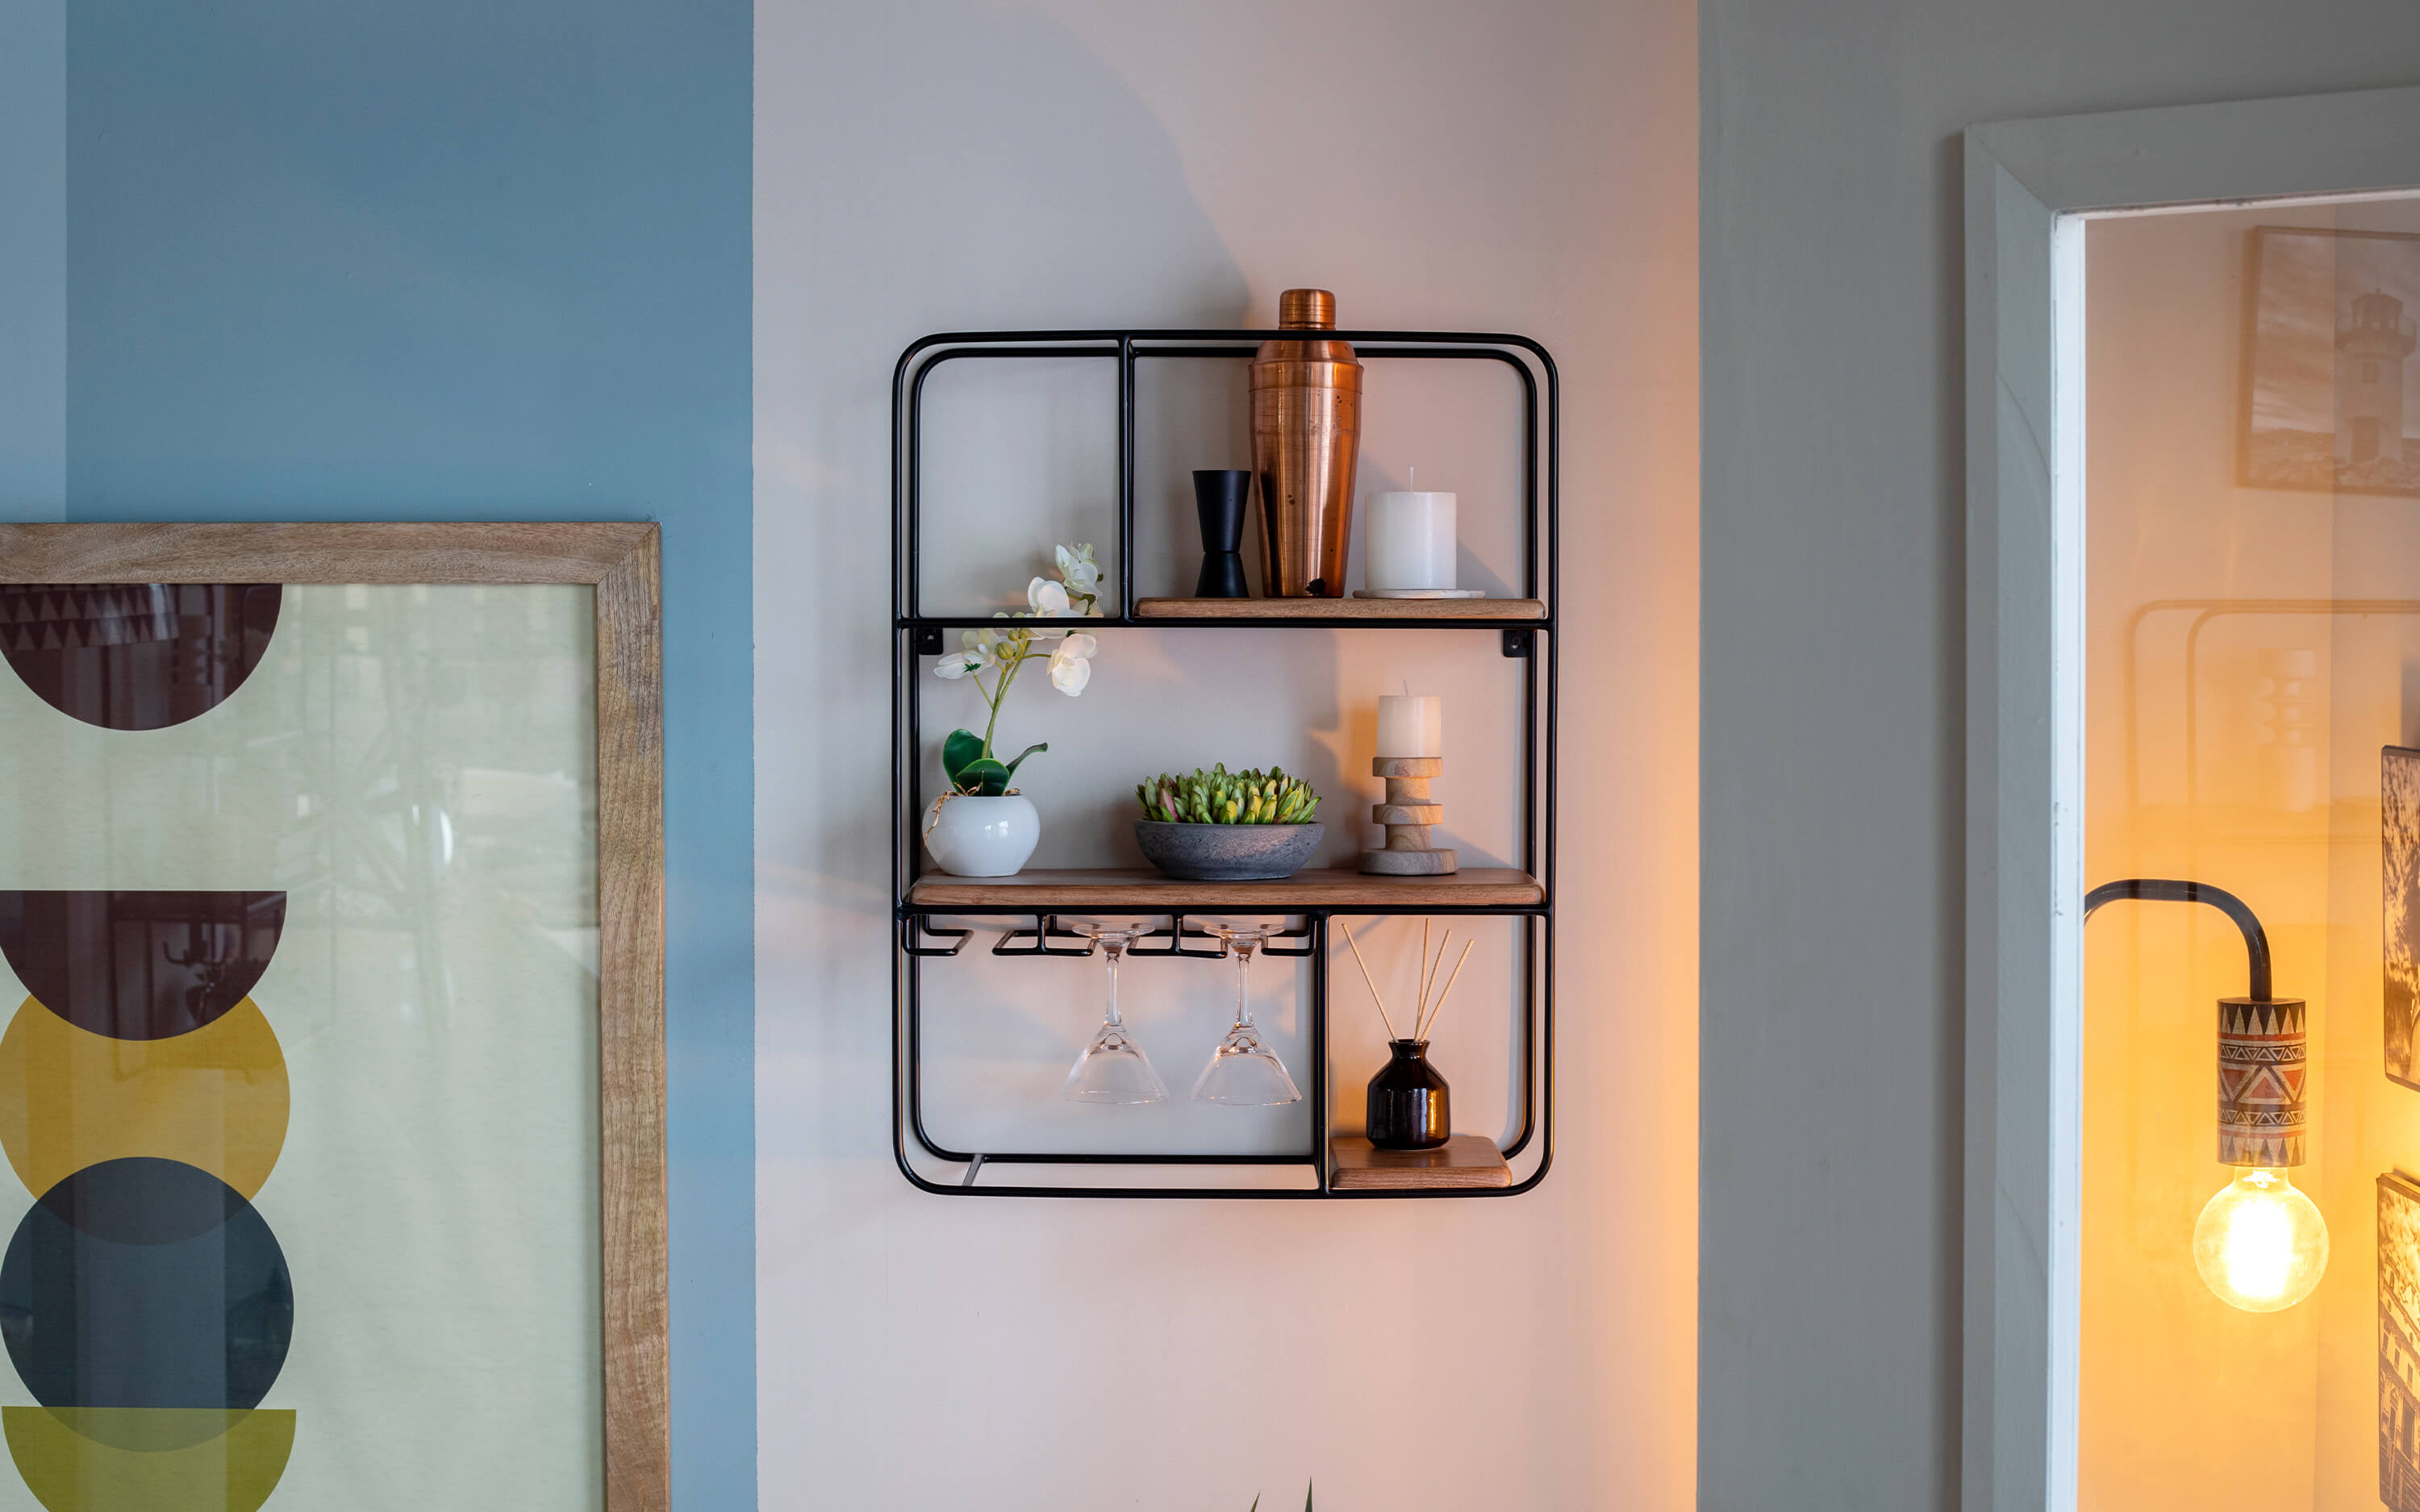 A modern, sleek wooden bar wall shelf designed for storing glasses and bar accessories, mounted on a plain wall